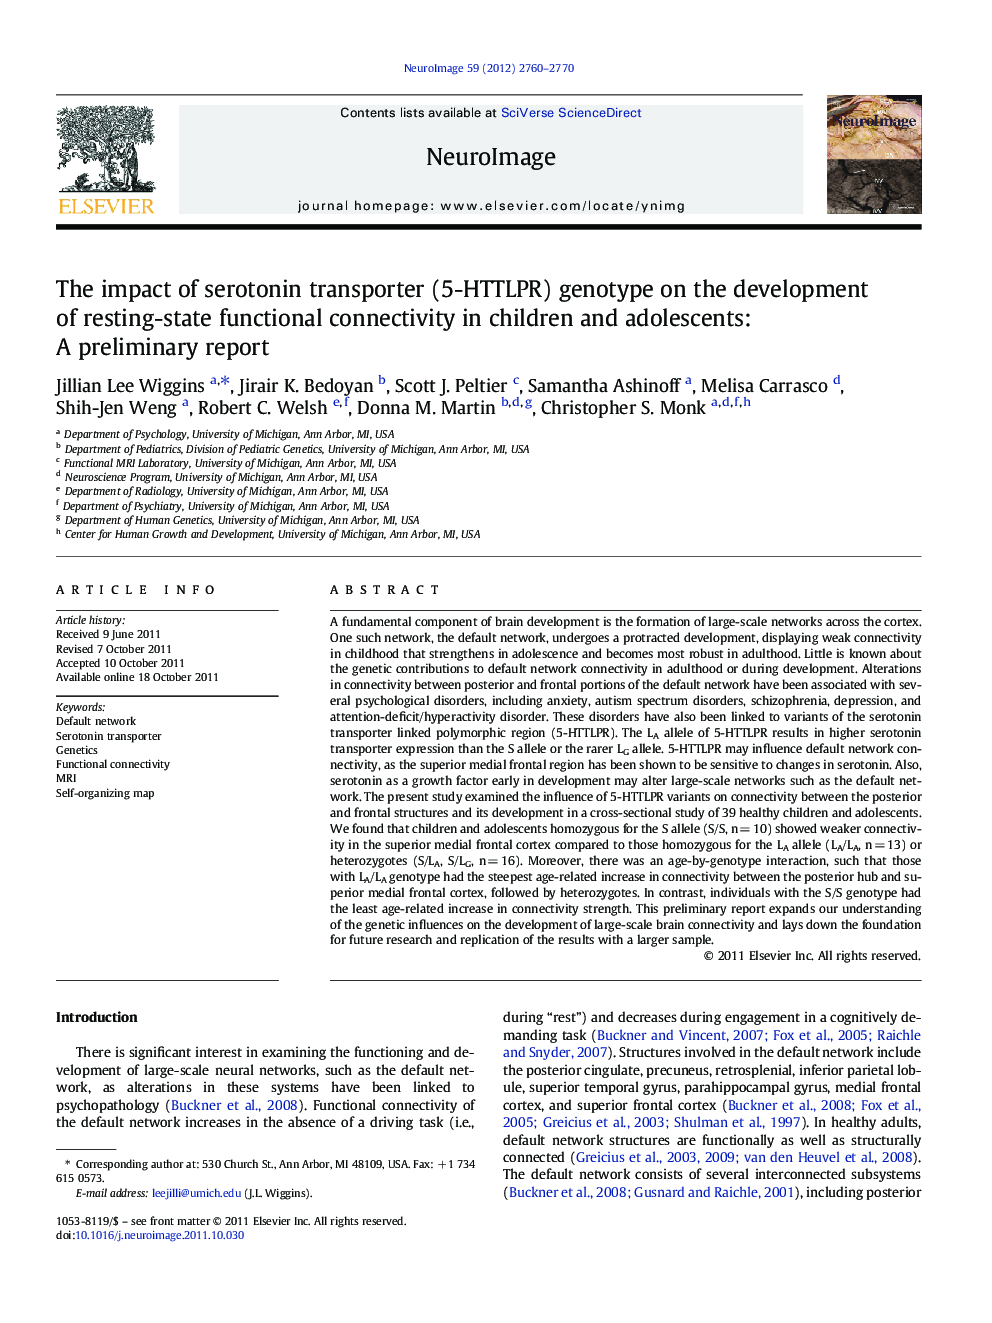 The impact of serotonin transporter (5-HTTLPR) genotype on the development of resting-state functional connectivity in children and adolescents: A preliminary report